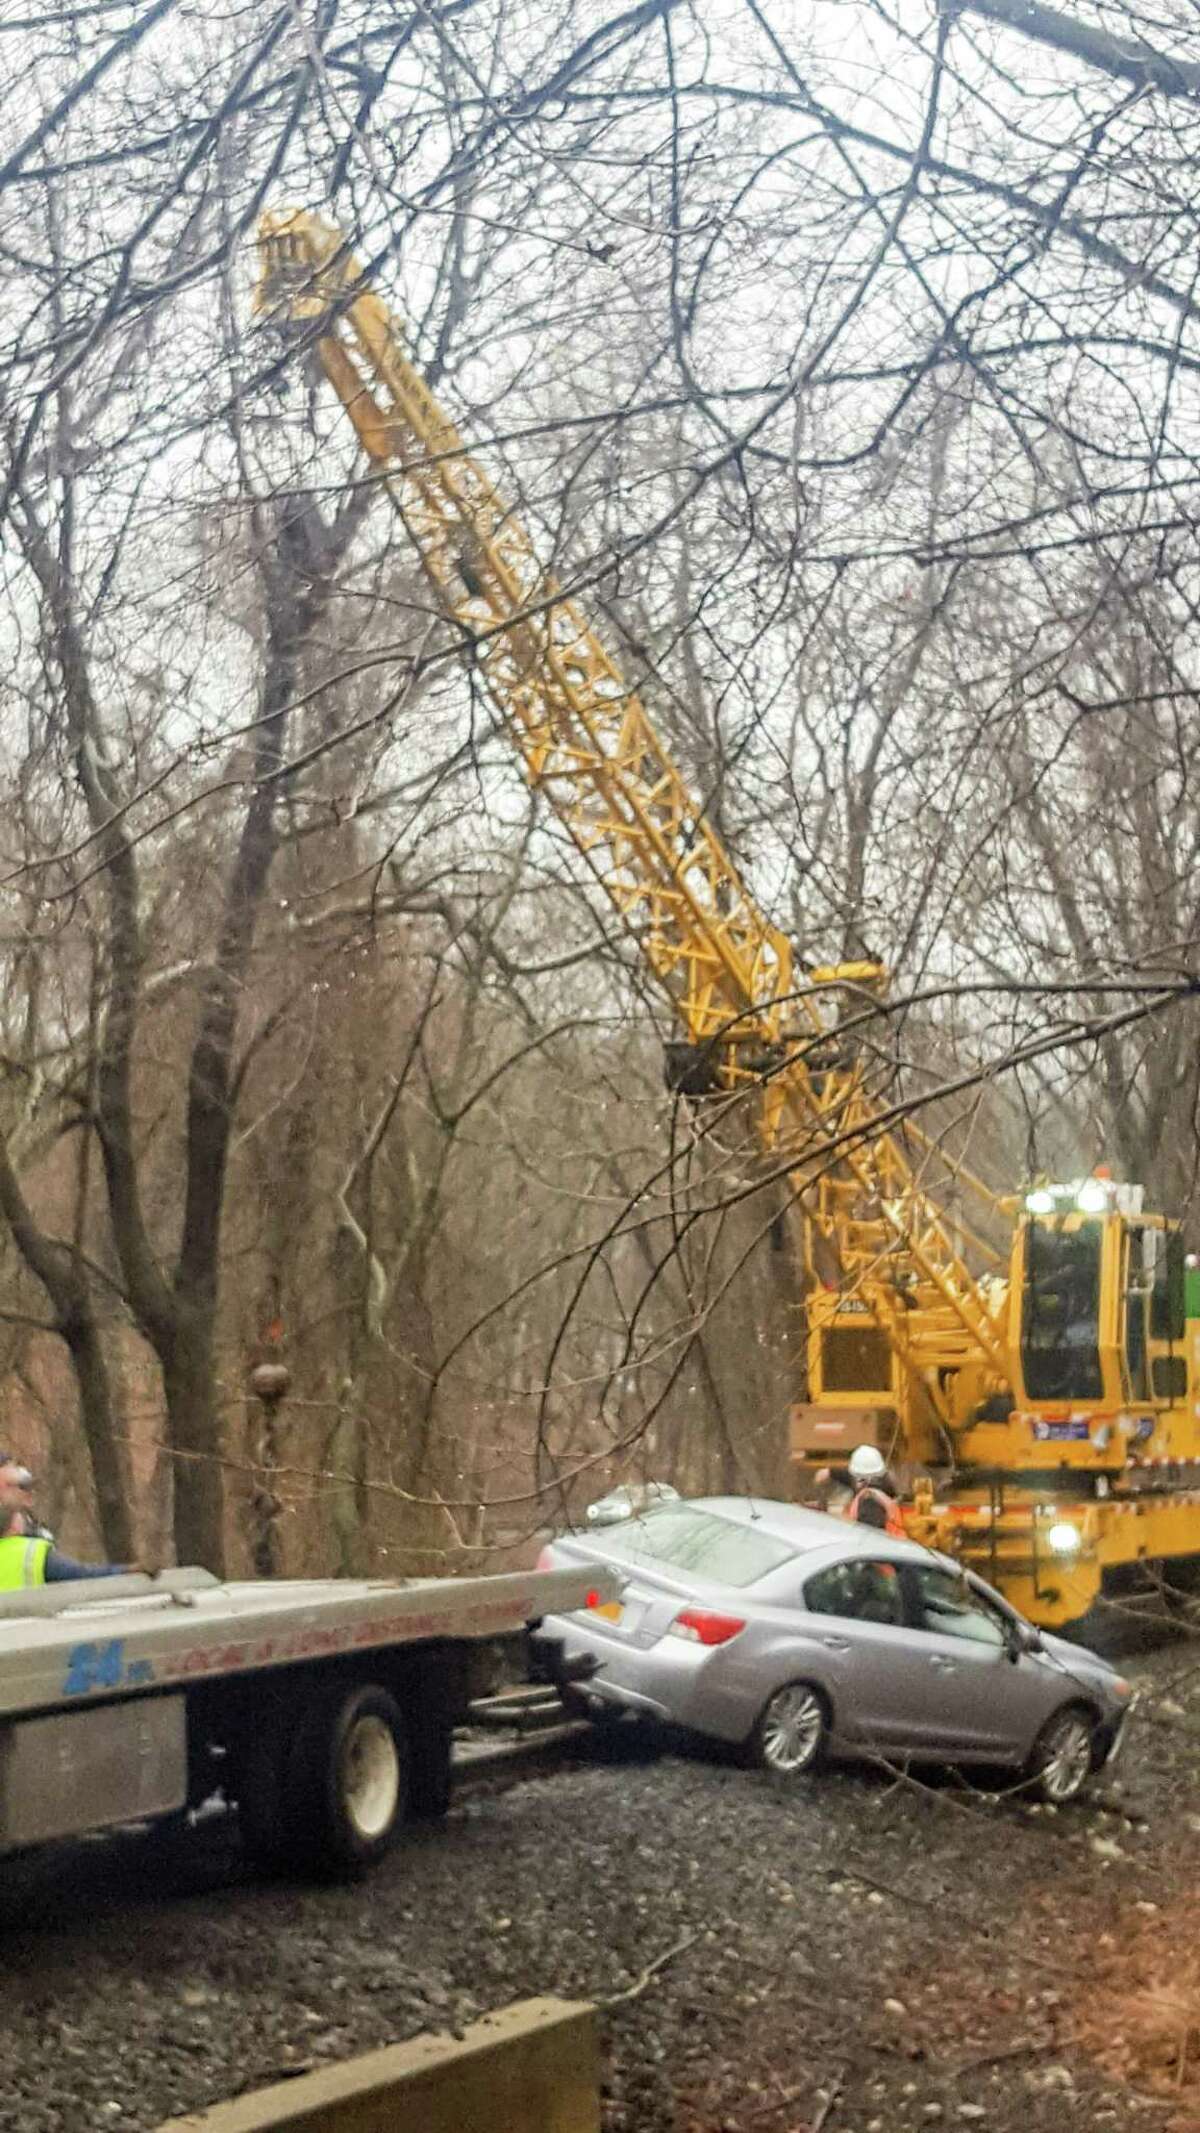 The Danbury Branch of the Metro-North Railroad is experiencing delays from Wilton to Branchville after a one-car crash led to a car getting stuck at the Mather Road grade crossing in Wilton, police said.